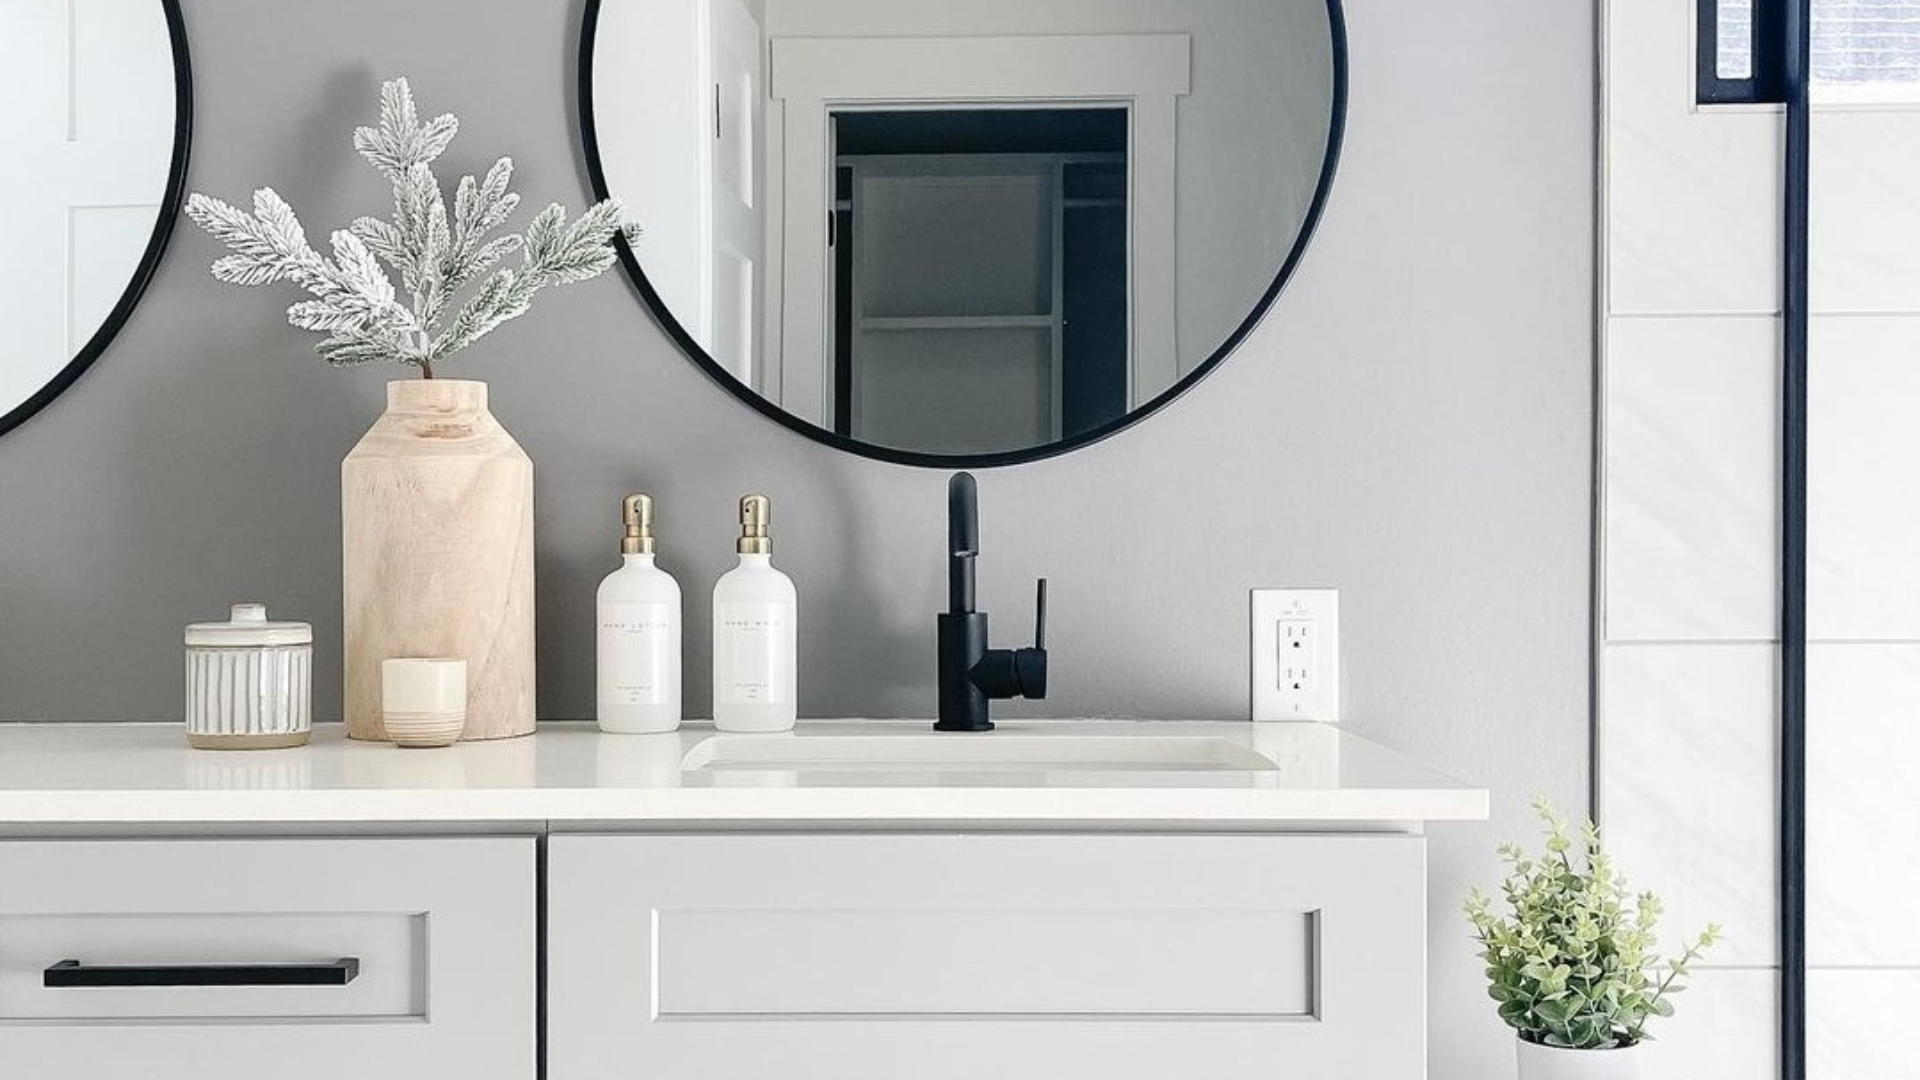 Bathroom counter and bottle dispensers